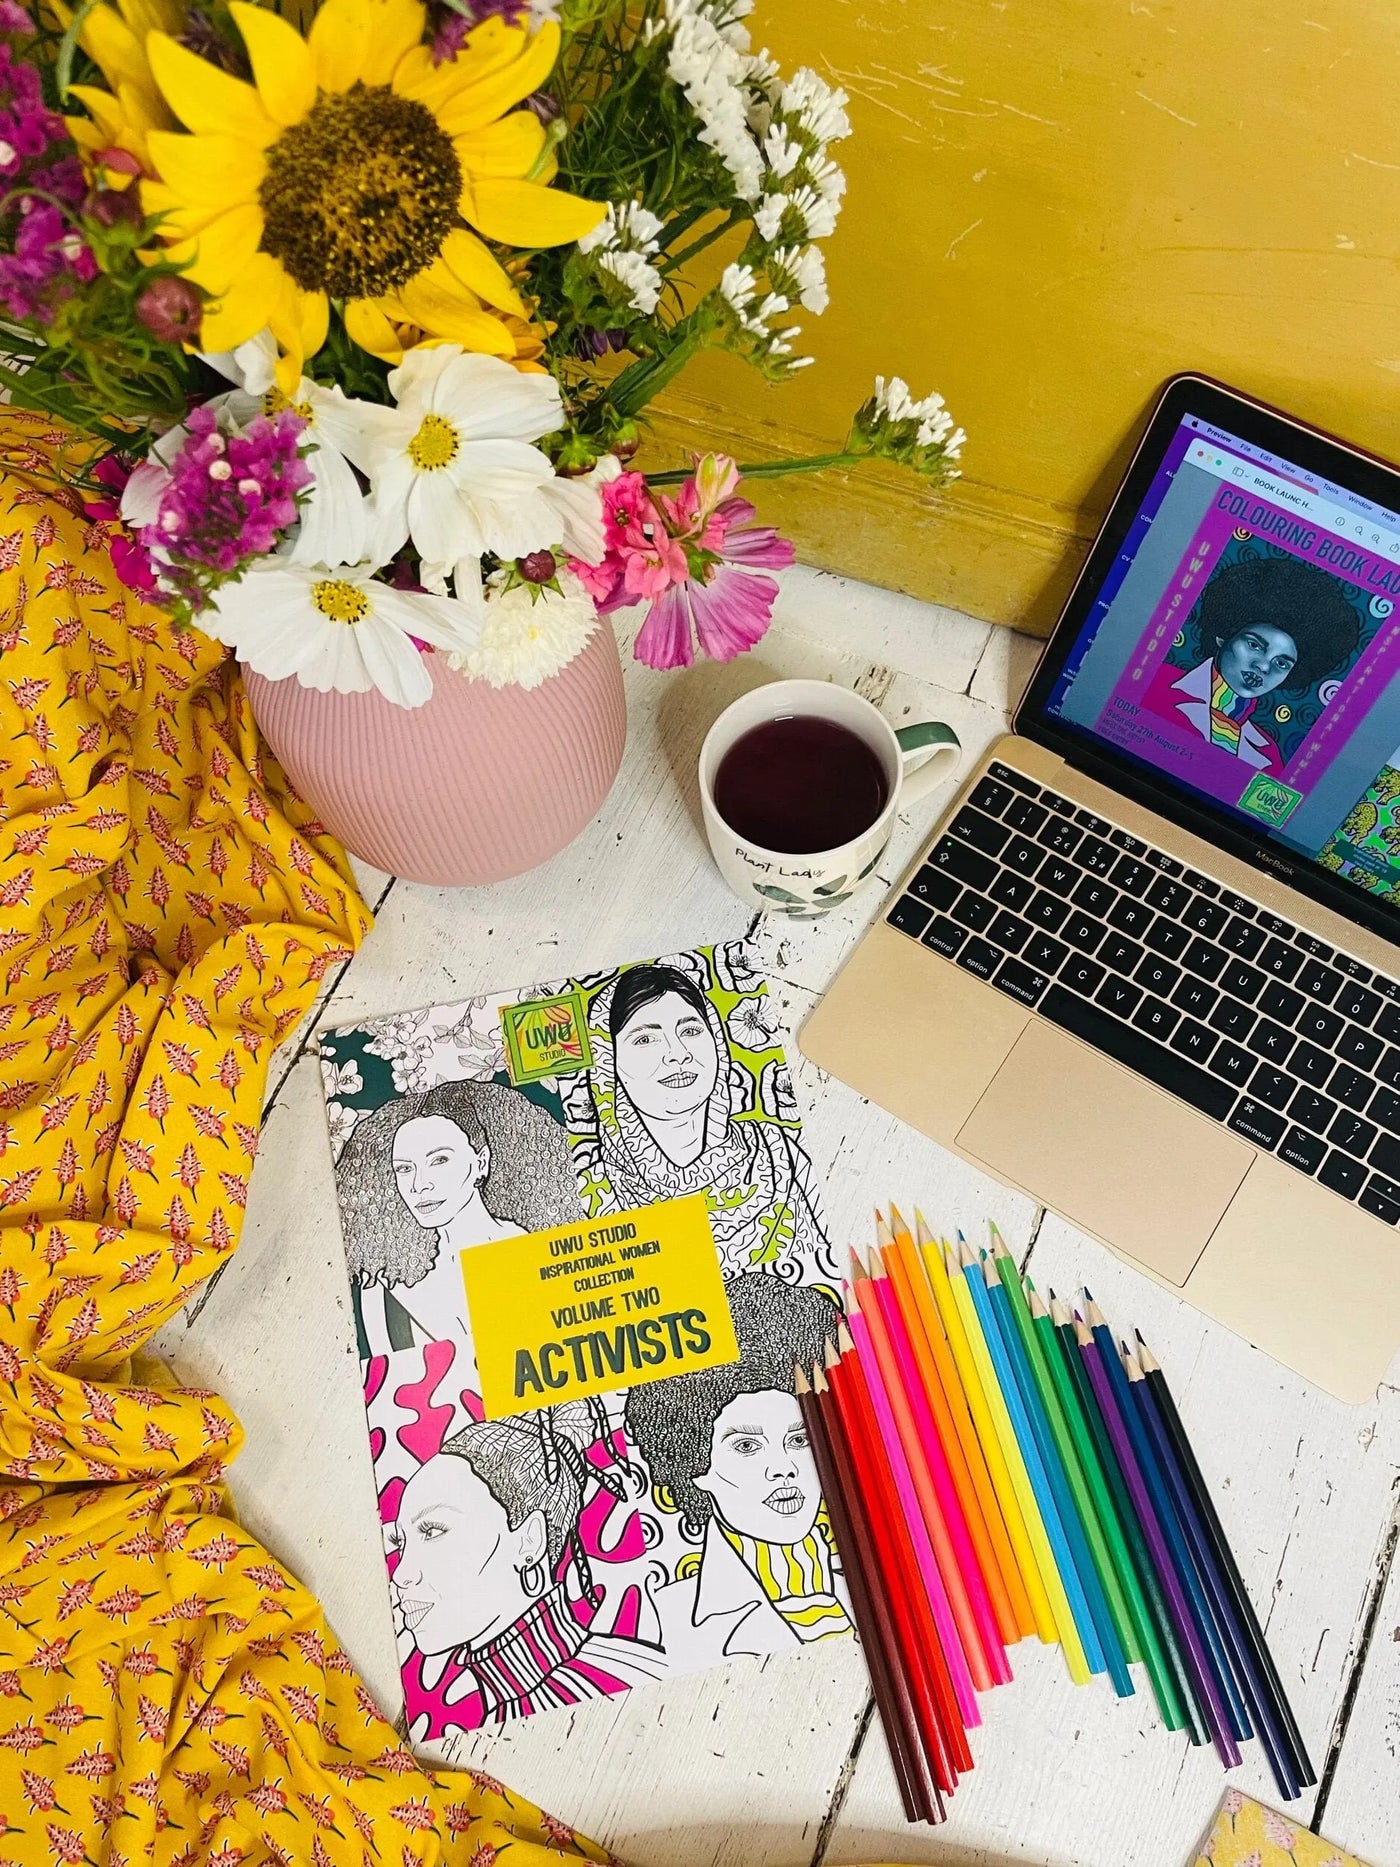 Inspirational Women Colouring Book by Uwu Studio - Activists - Migration Museum Shop